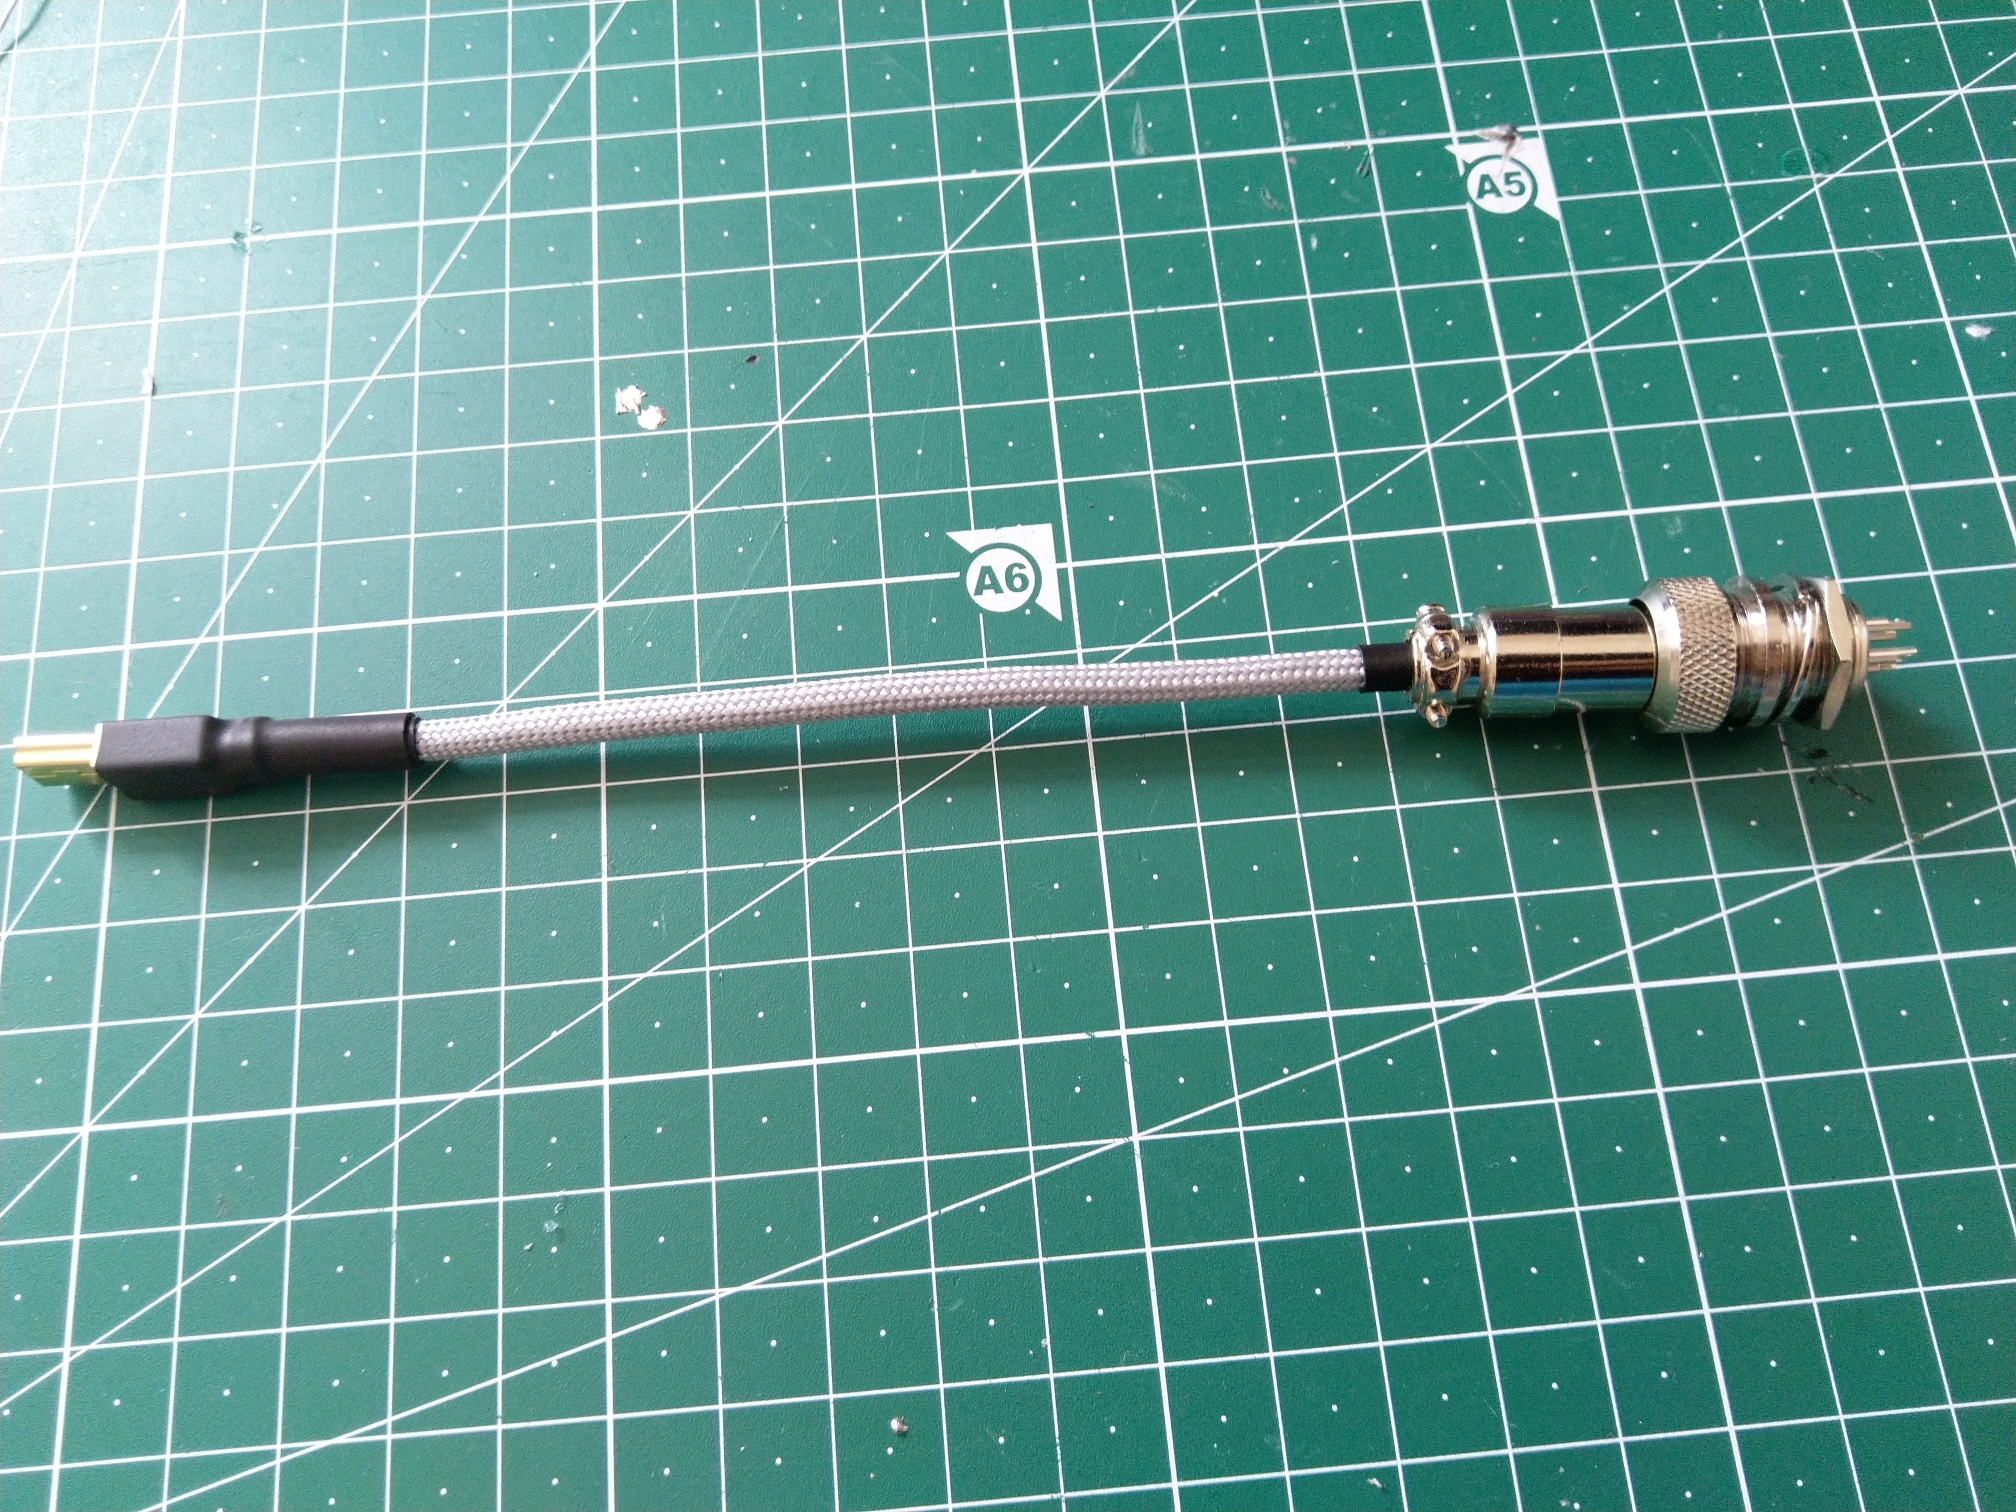 The second heat-shrink covering the connector added and therefore the first piece of cable completed.